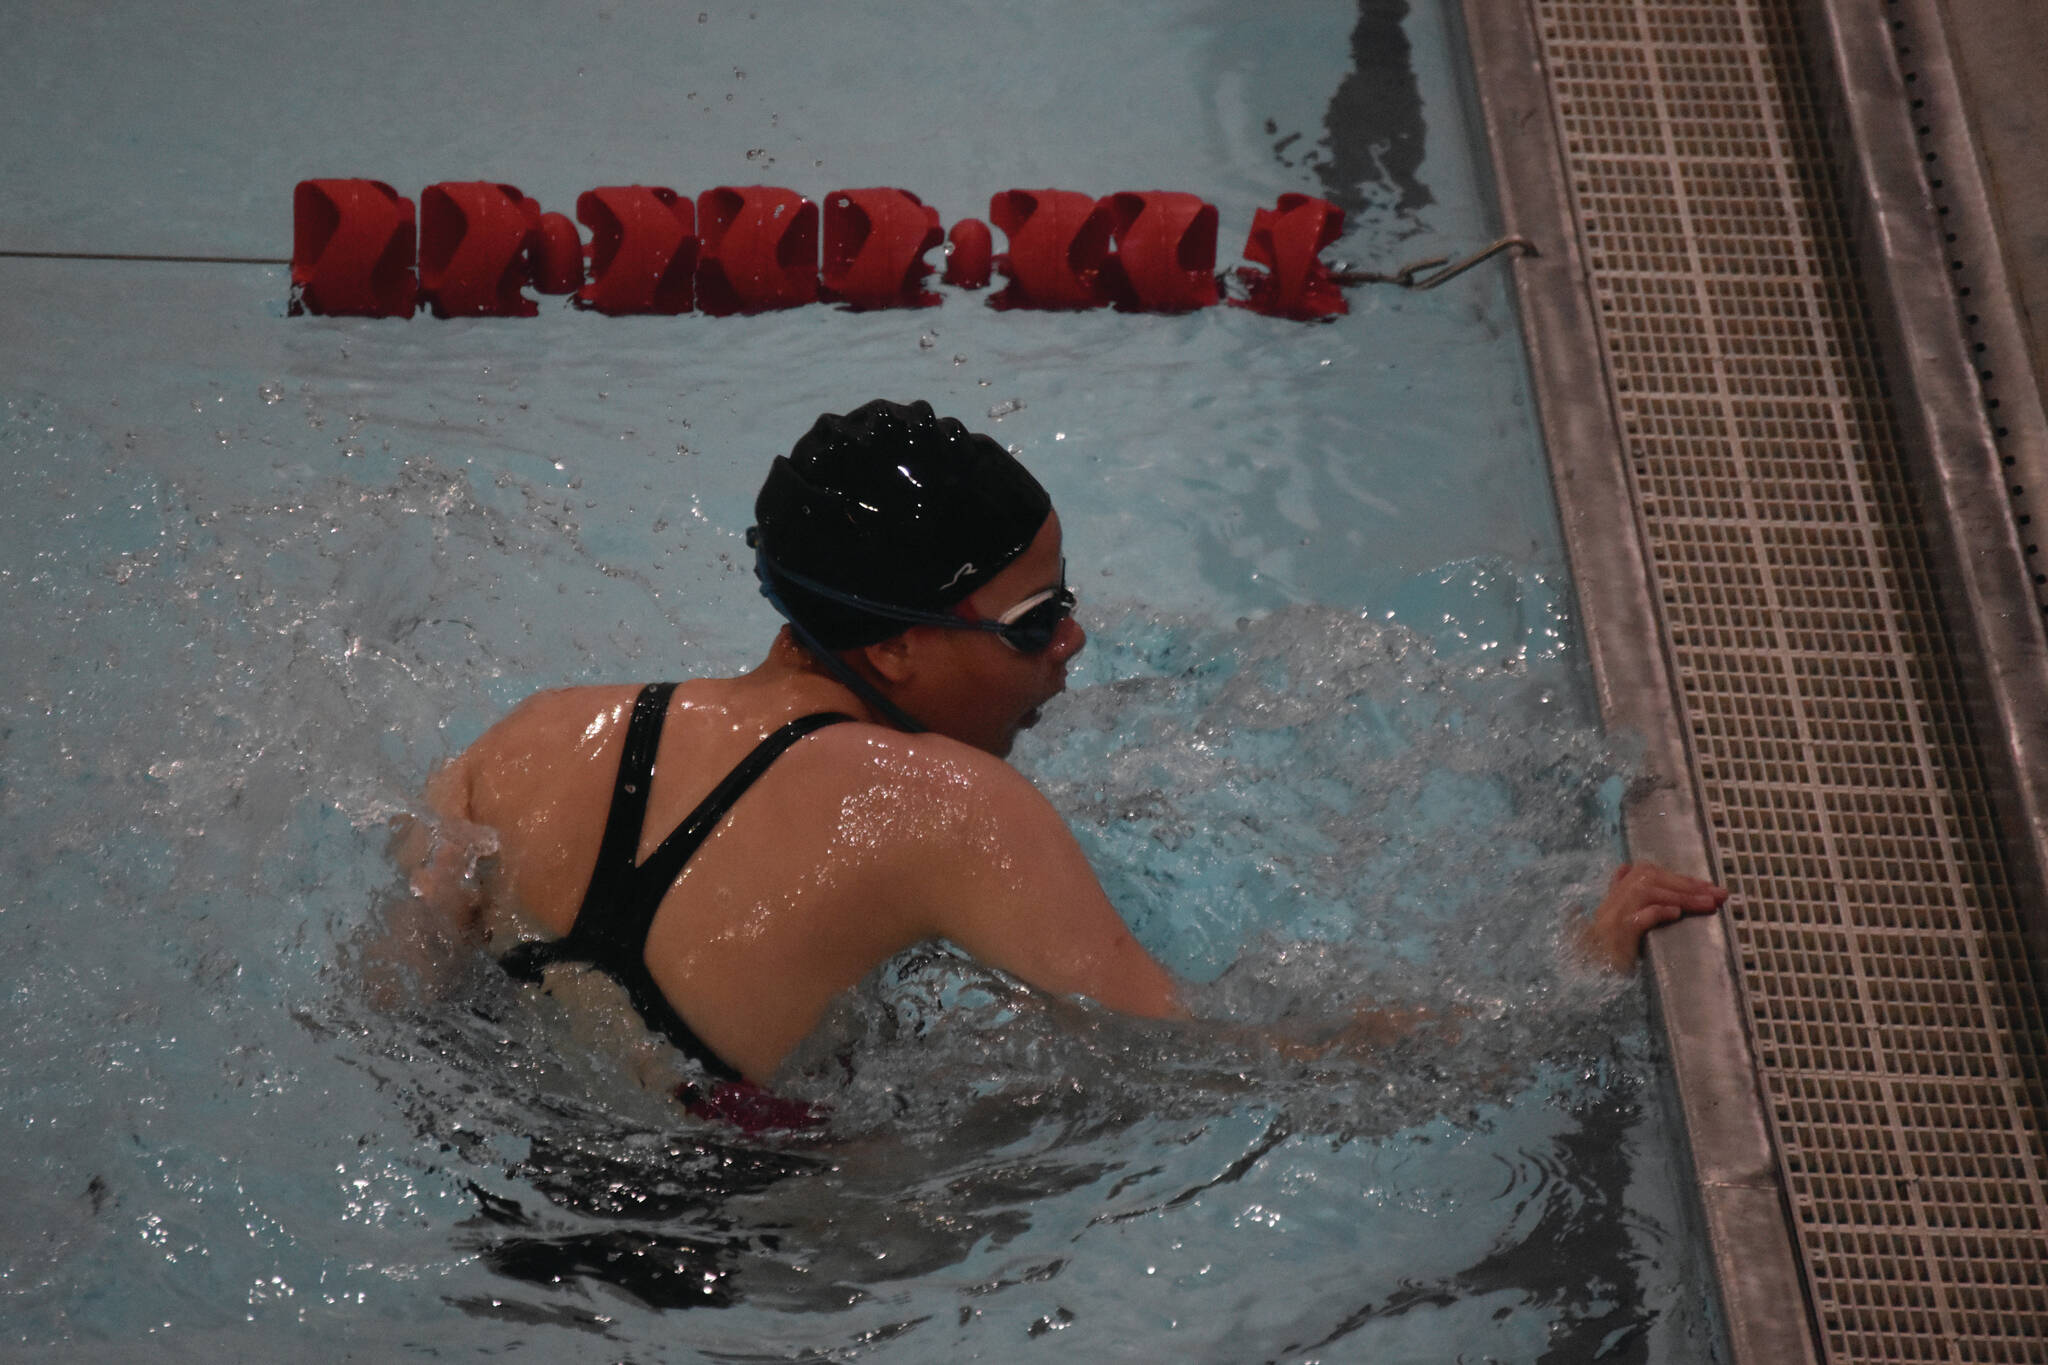 Michelle Duffield, of Kenai, performs an open turn while swimming her leg of the 200-yard medley relay at Kenai Central High School in Kenai, Alaska, on Aug. 27, 2022. (Jake Dye/Peninsula Clarion)